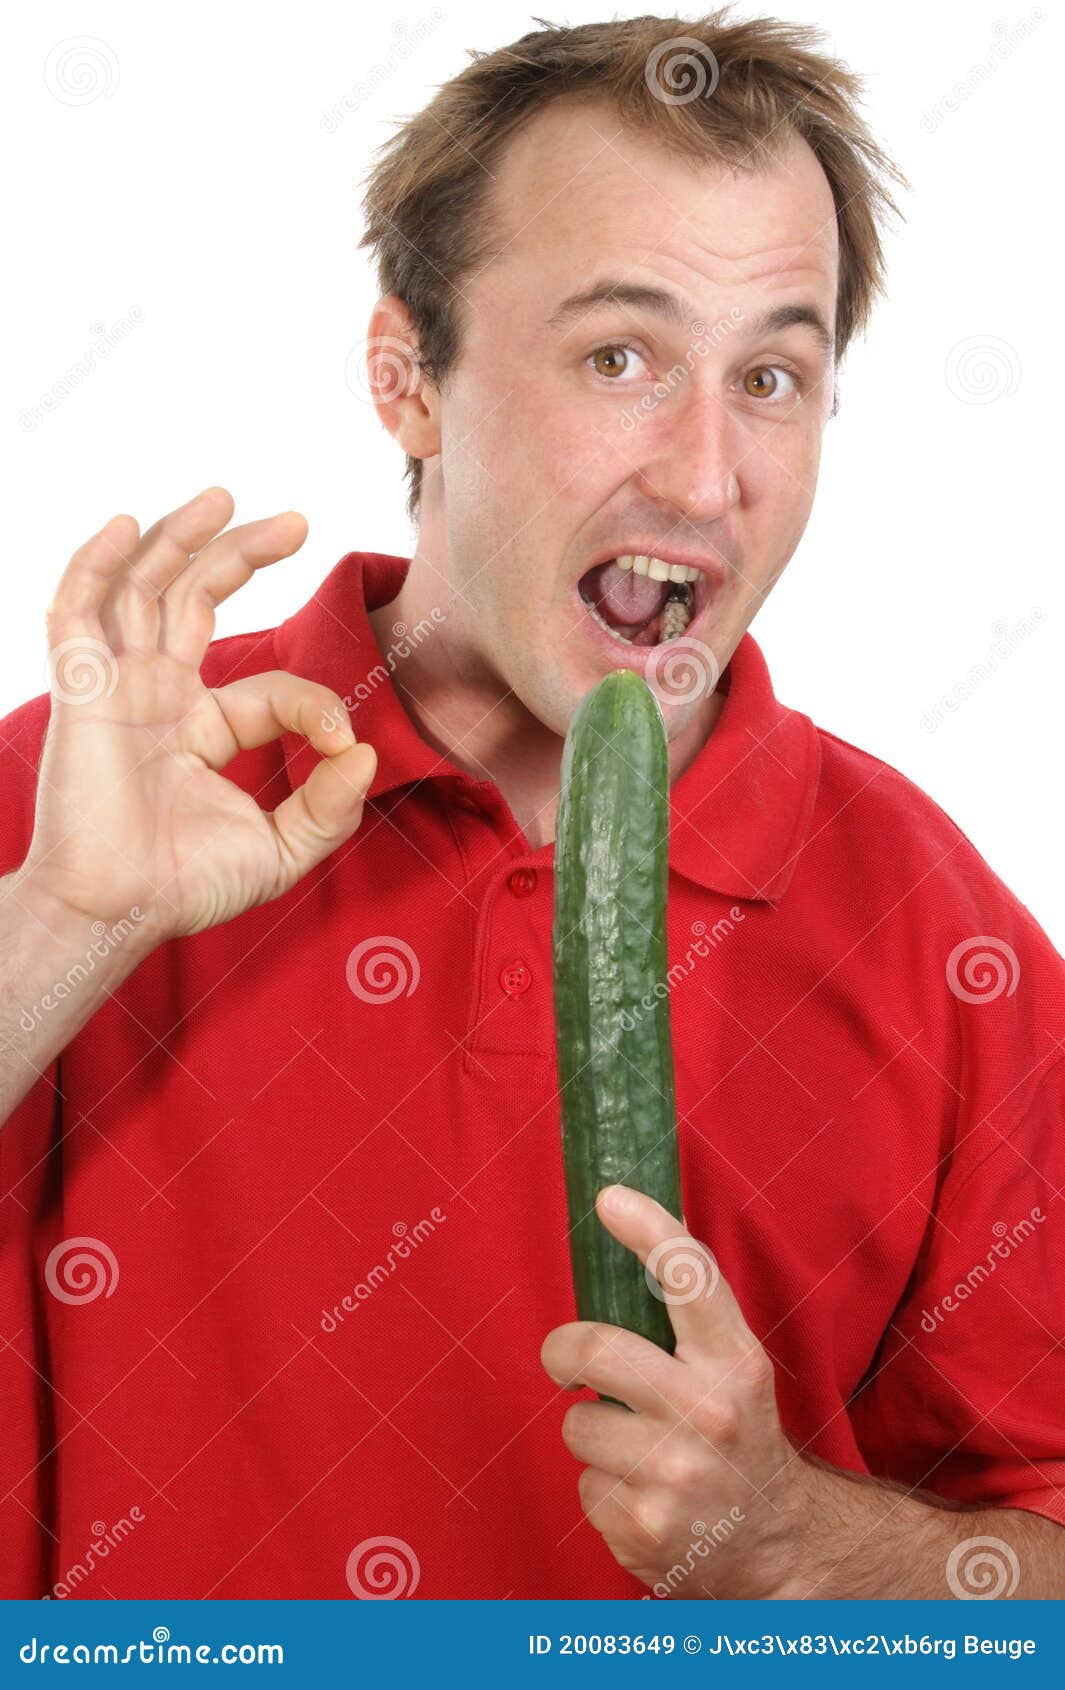 Man With A Cucumber In His Hand Stock Image Image Of Male Hand 20083649